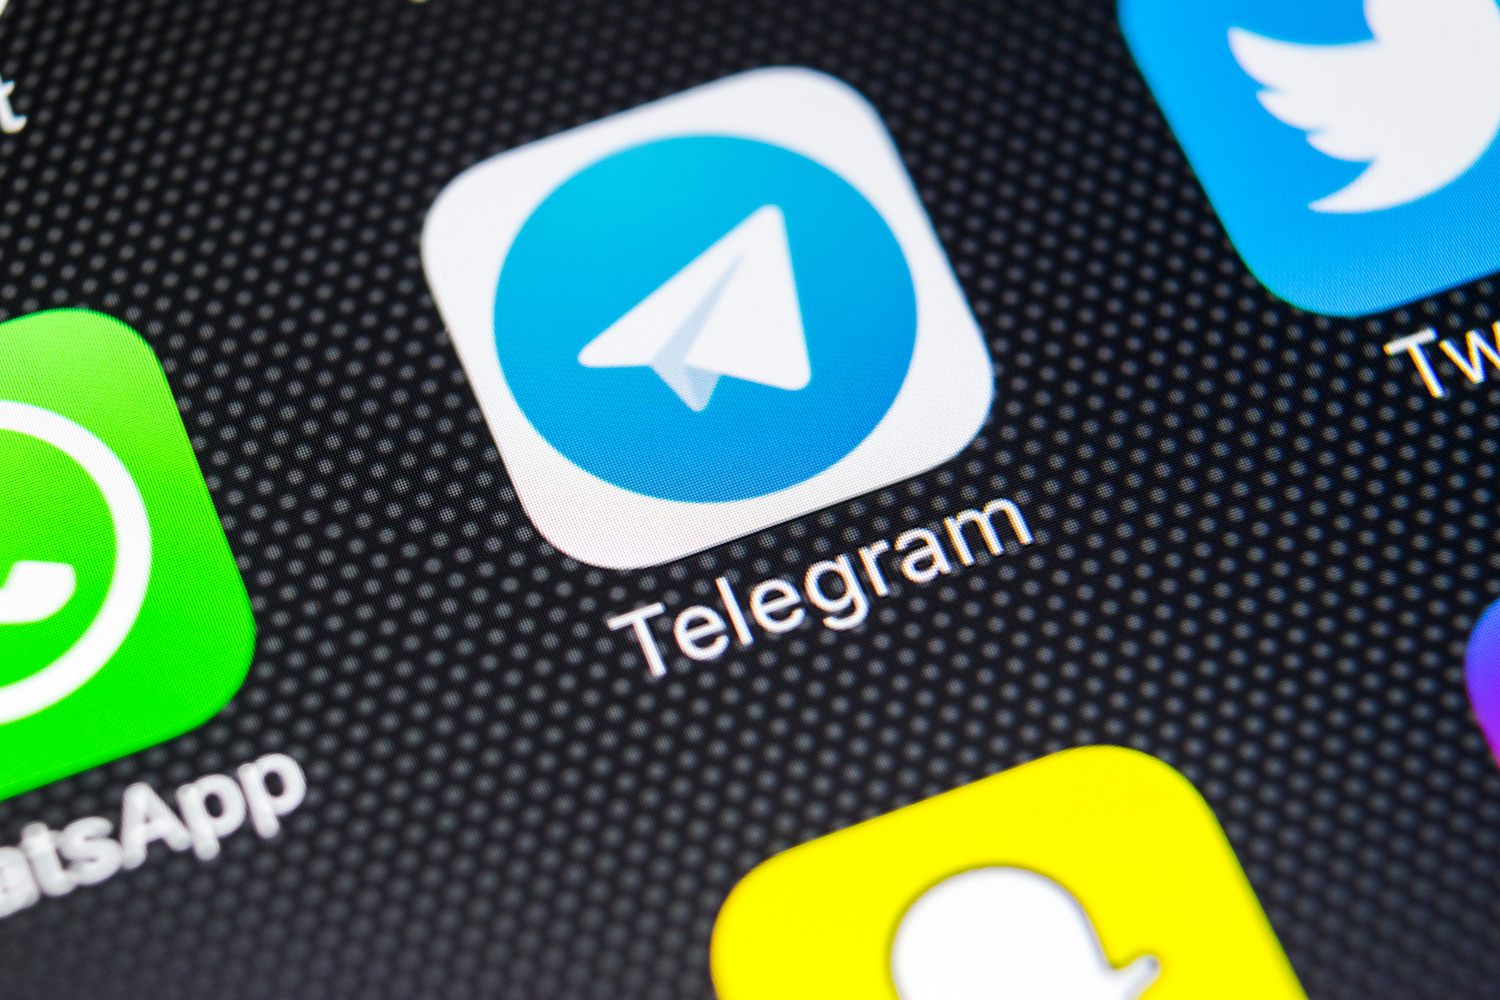 Messaging Giant Telegram’s ICO Token Is At Last Going On Public Sale